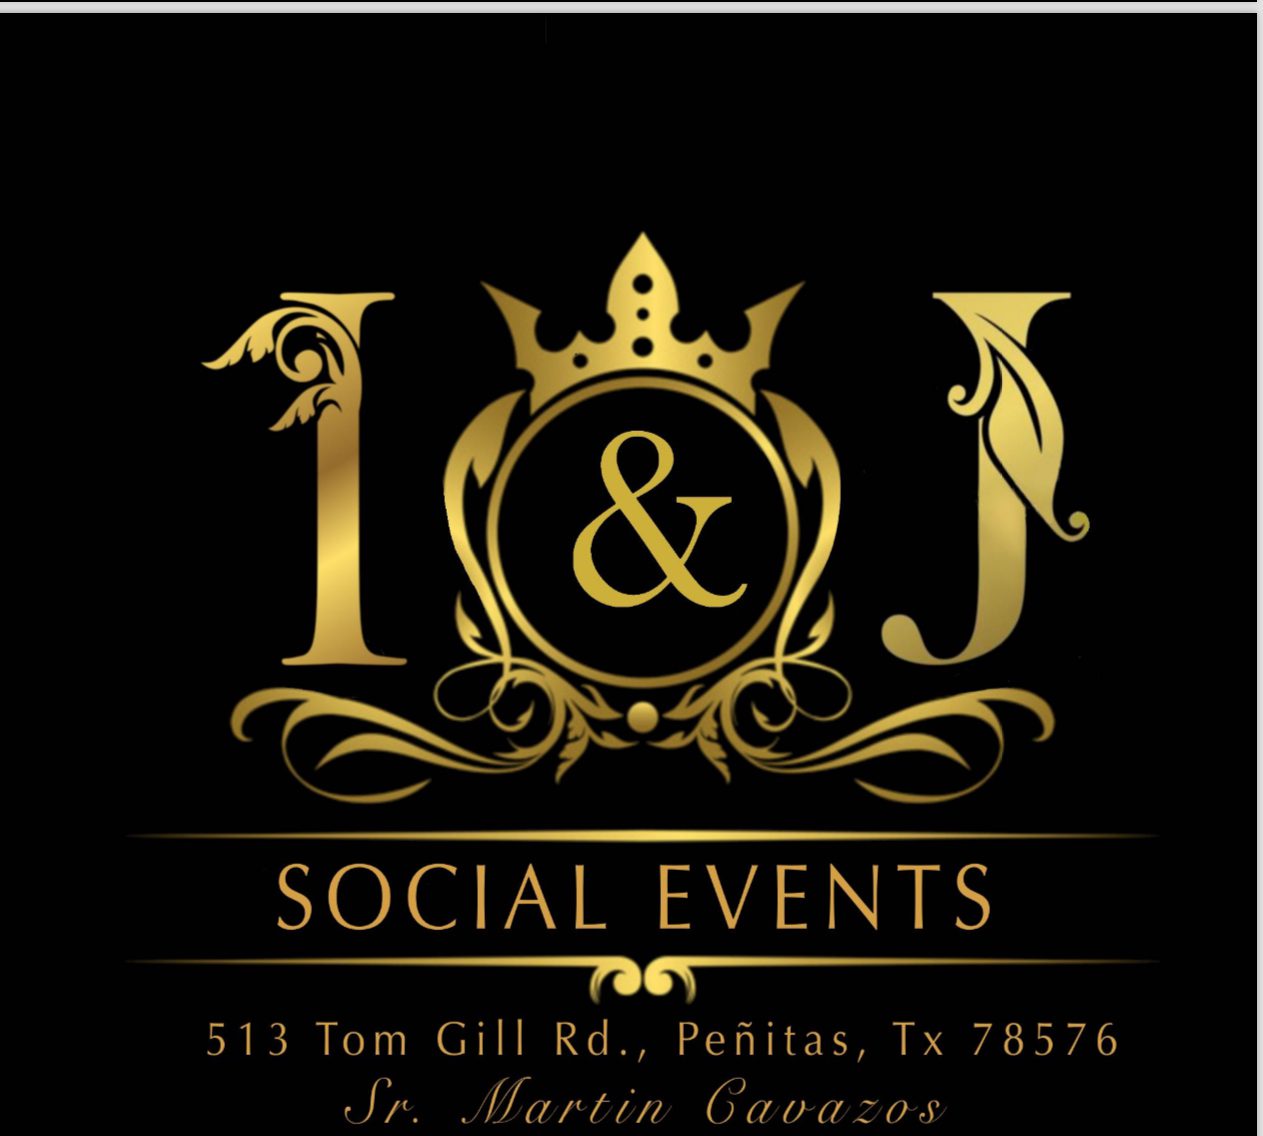 **I & J Ballroom: Elegant and Versatile Venue3 in Peñitas, Texas** Visit us and reserve your date today! 504 Tom Gill Rd. Penitas, TX  (956) 562-7769 When planning a wedding, quinceañera, or social event, choosing the perfect venue is crucial. In Peñitas, Texas, I & J Ballroom stands out as a premier social event center. Located conveniently in the heart of this charming city, I & J Ballroom offers an exceptional setting for all kinds of celebrations.